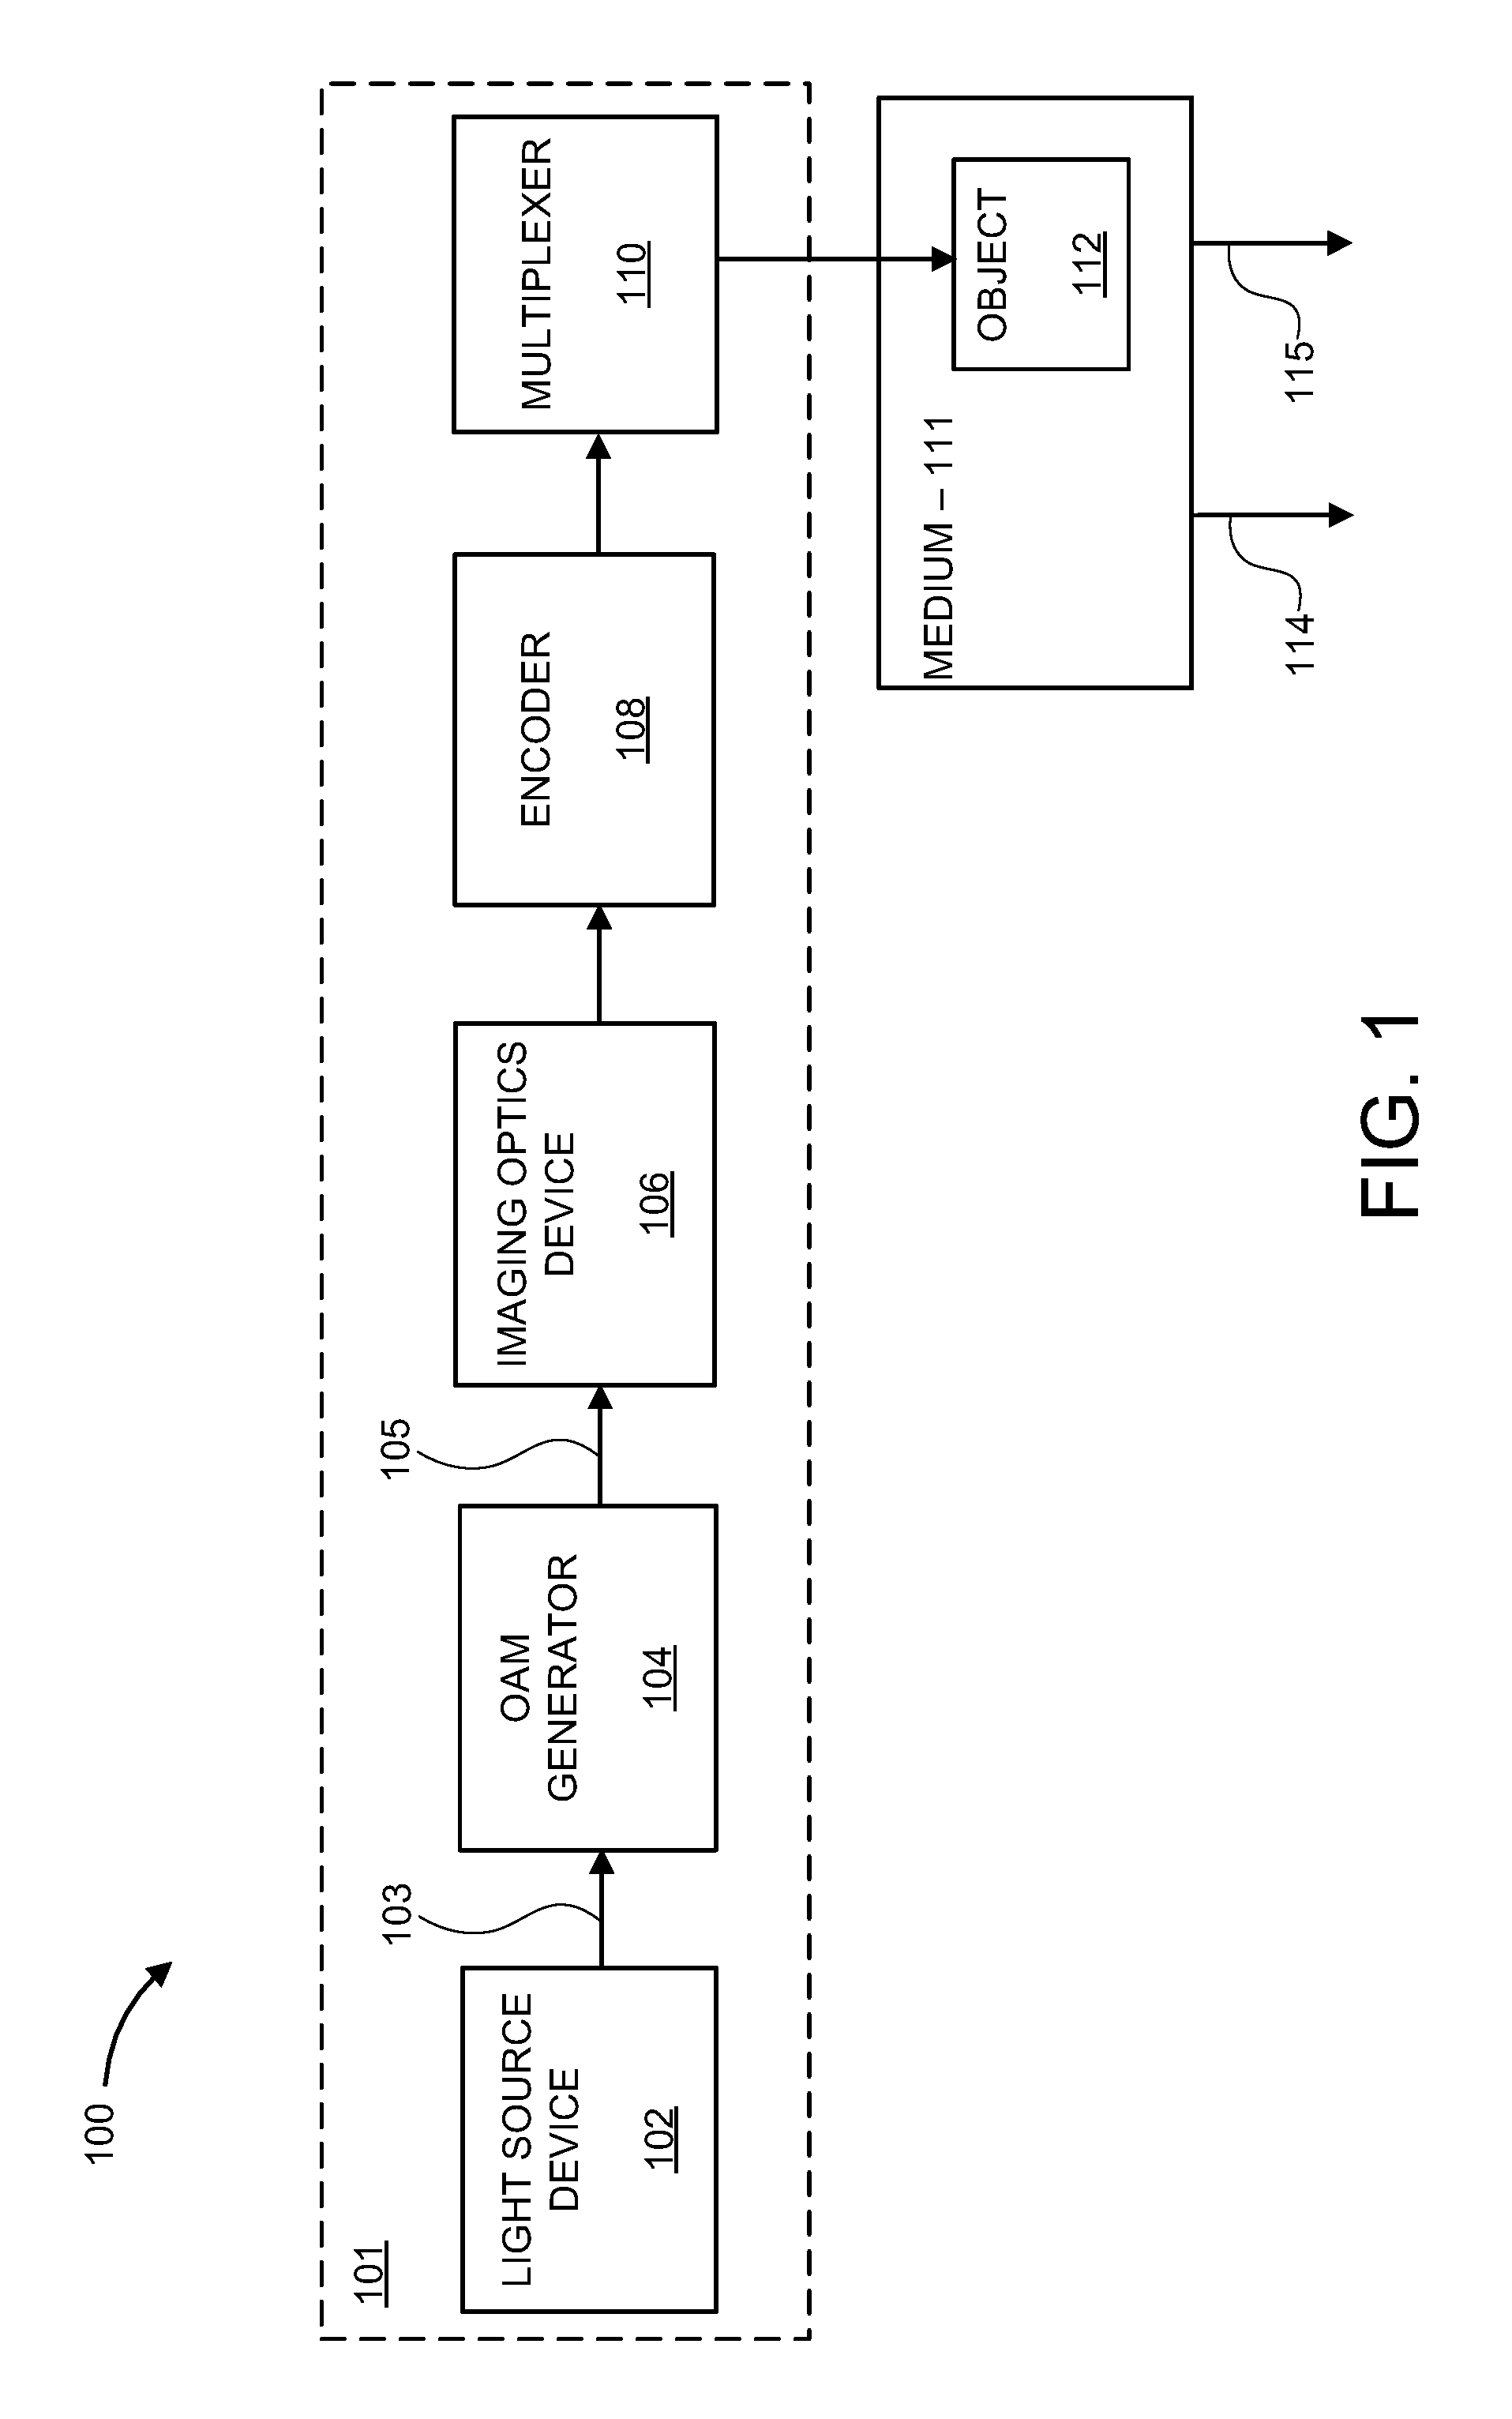 Method and apparatus for photoacoustic tomography using optical orbital angular momentum (OAM)